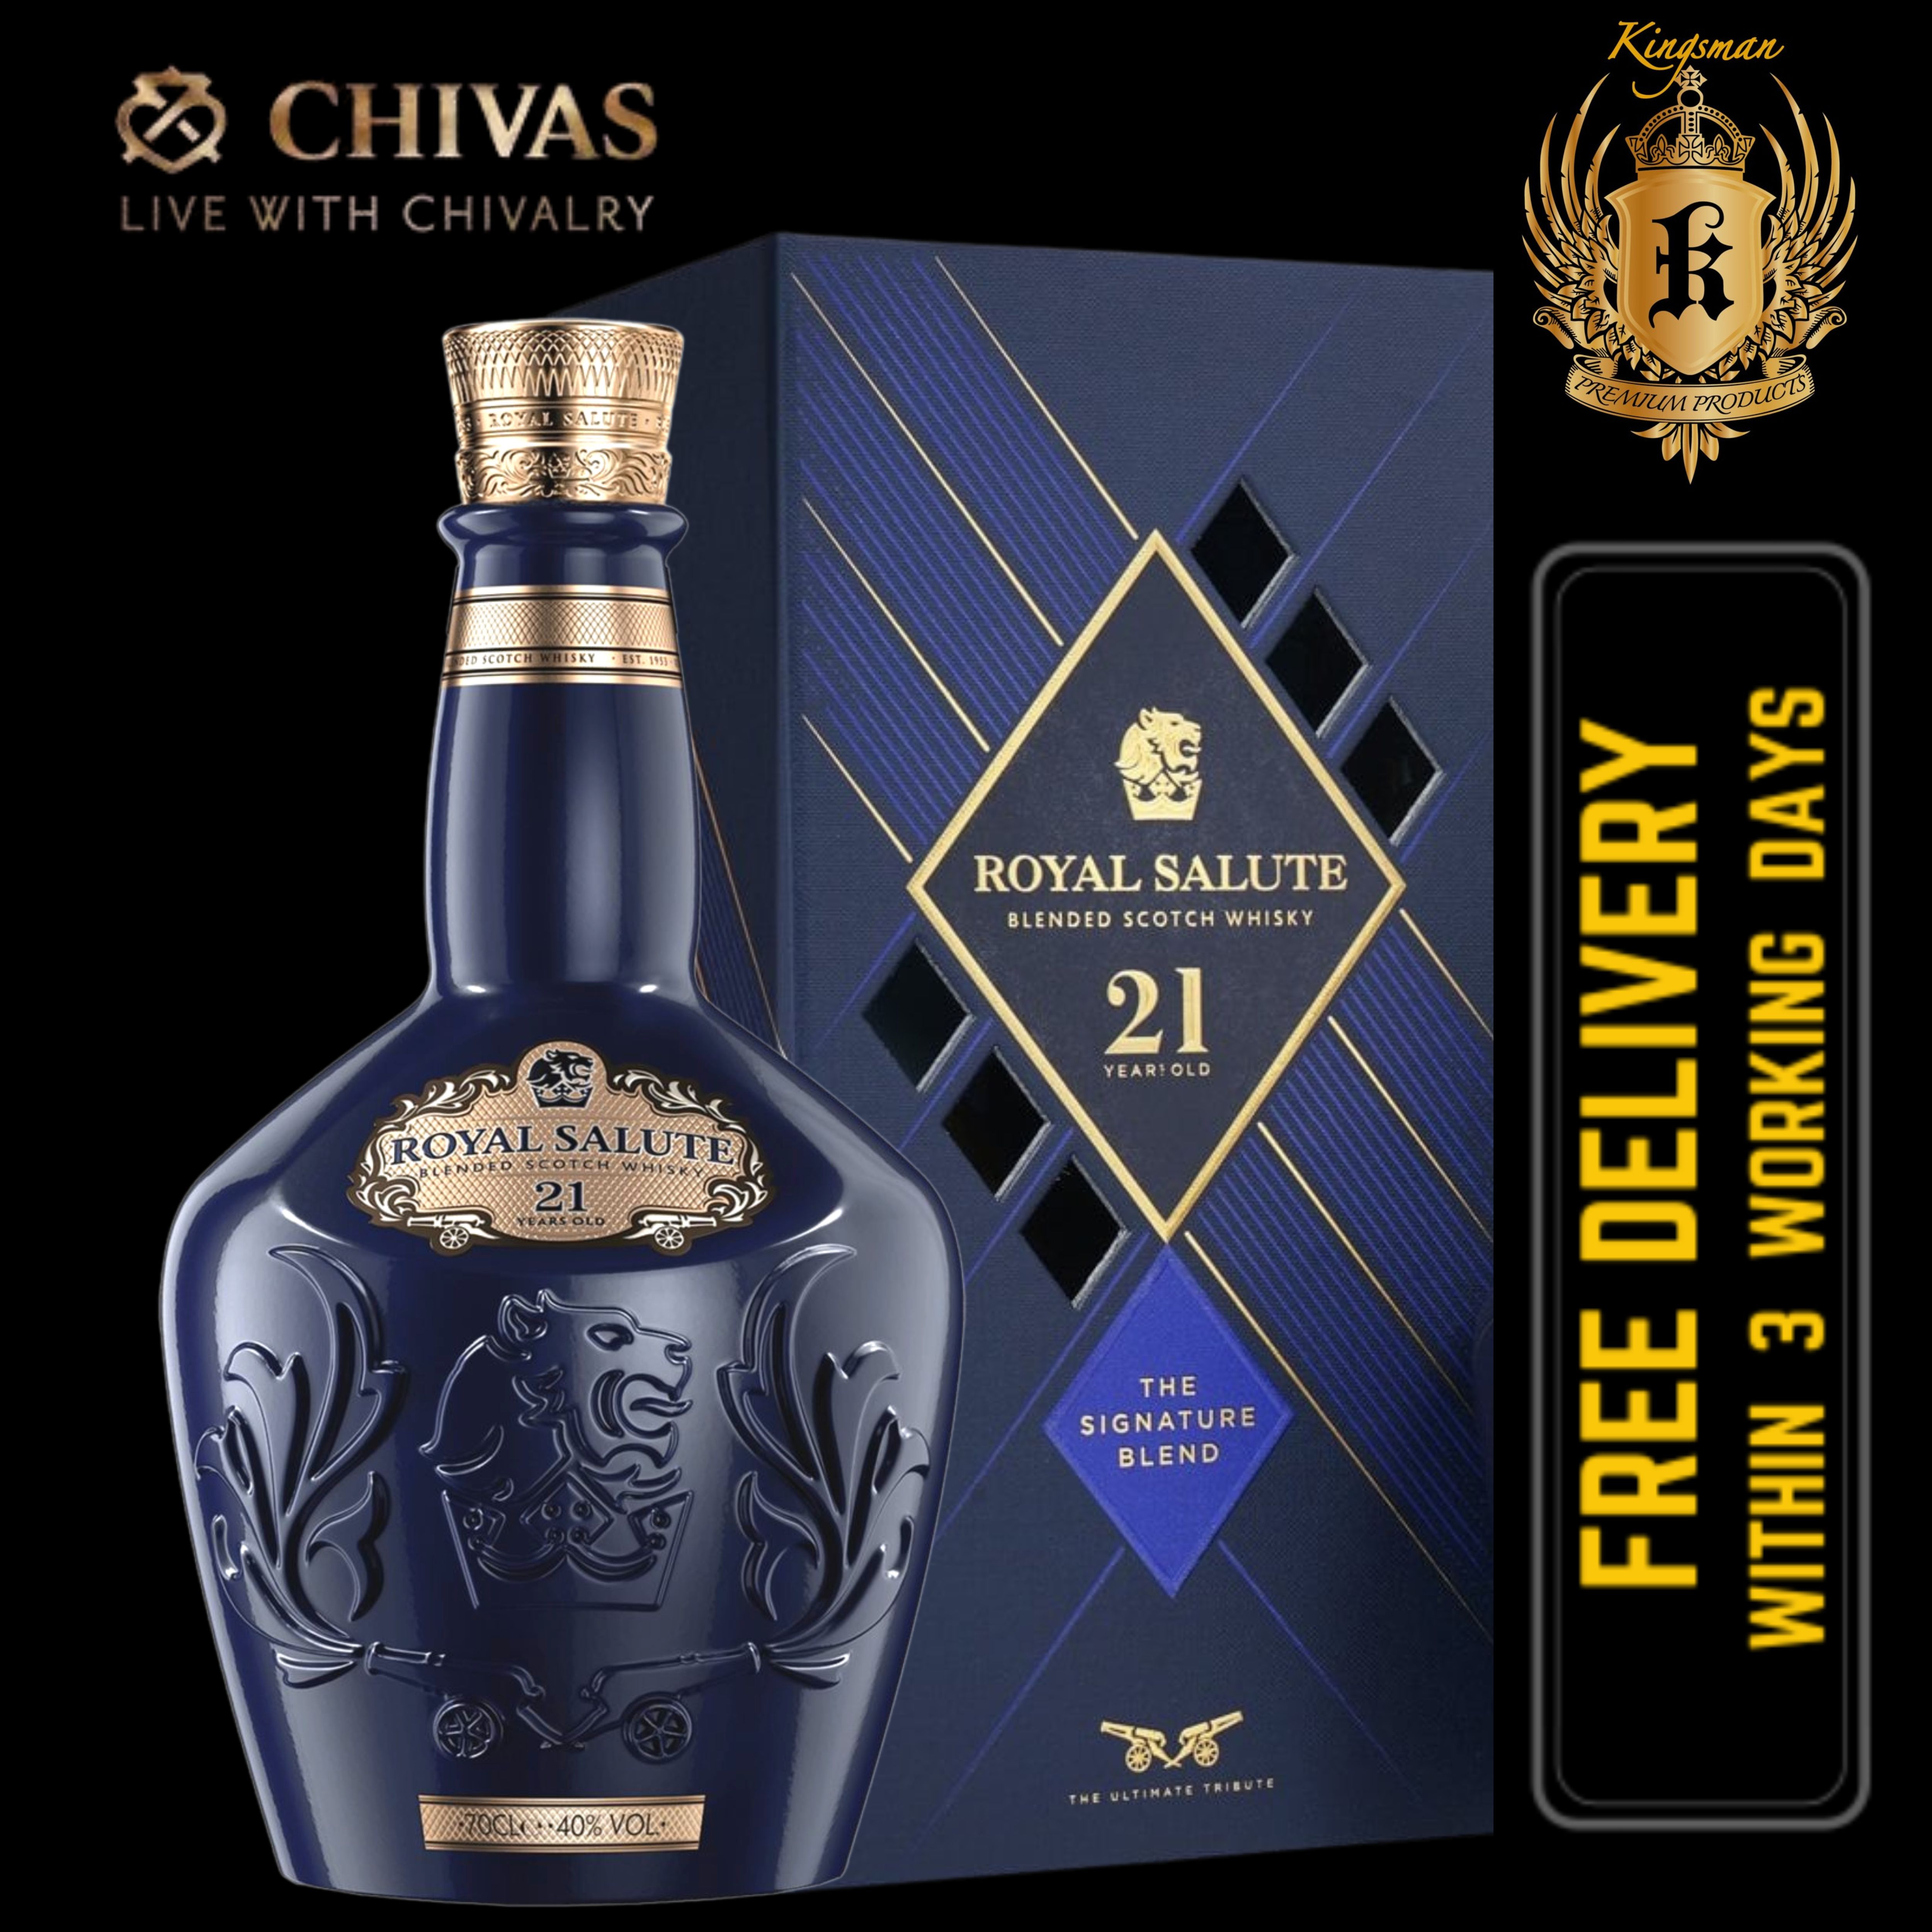 Chivas Regal Royal Salute 21 Years 700ml The Signature Blend (with box)